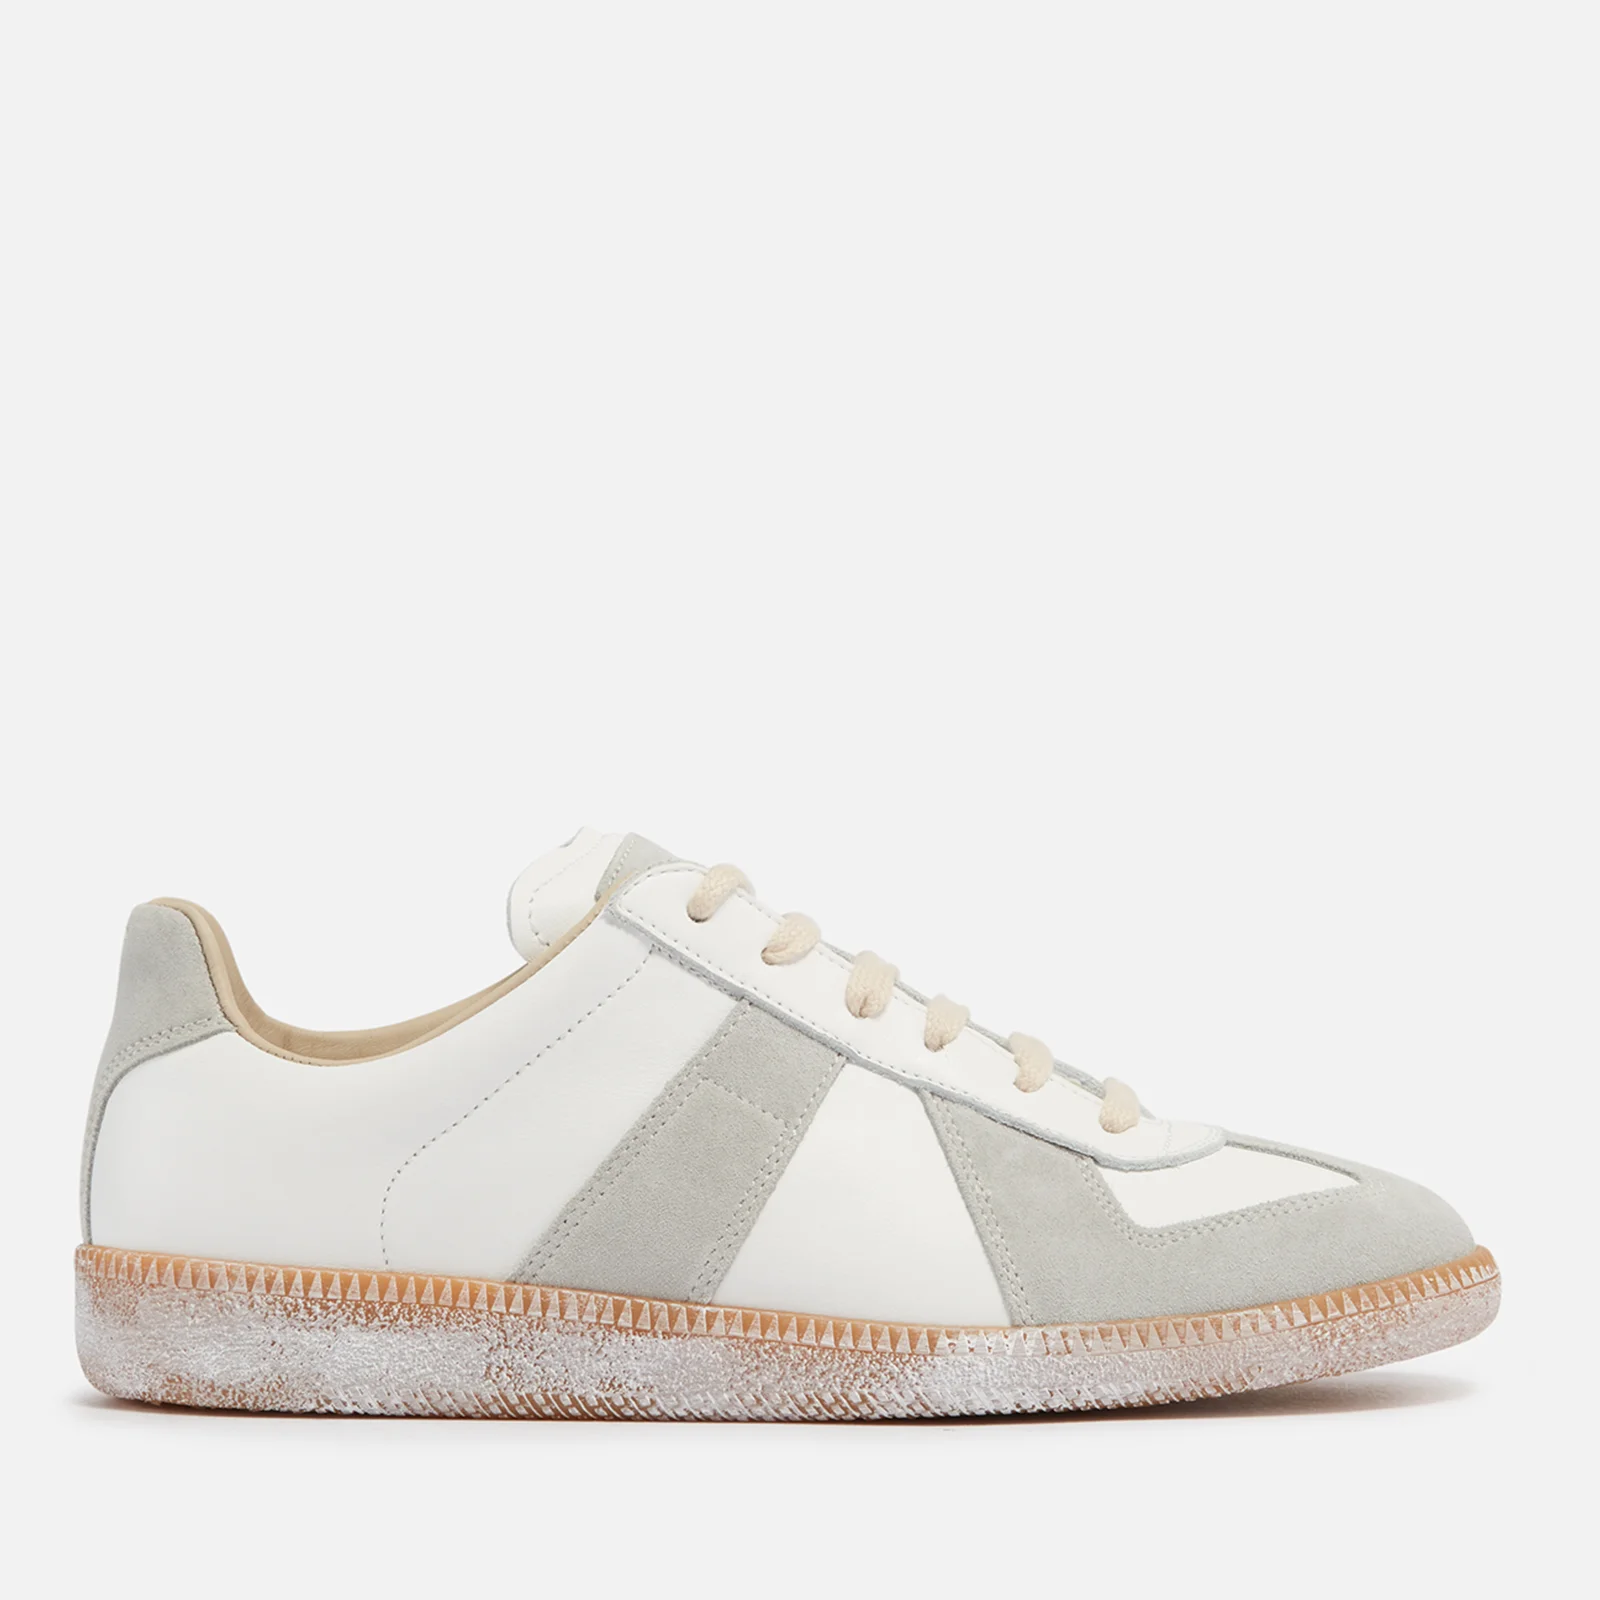 Maison Margiela Replica Deconstructed Leather, Suede and Cotton-Canvas Trainers Image 1